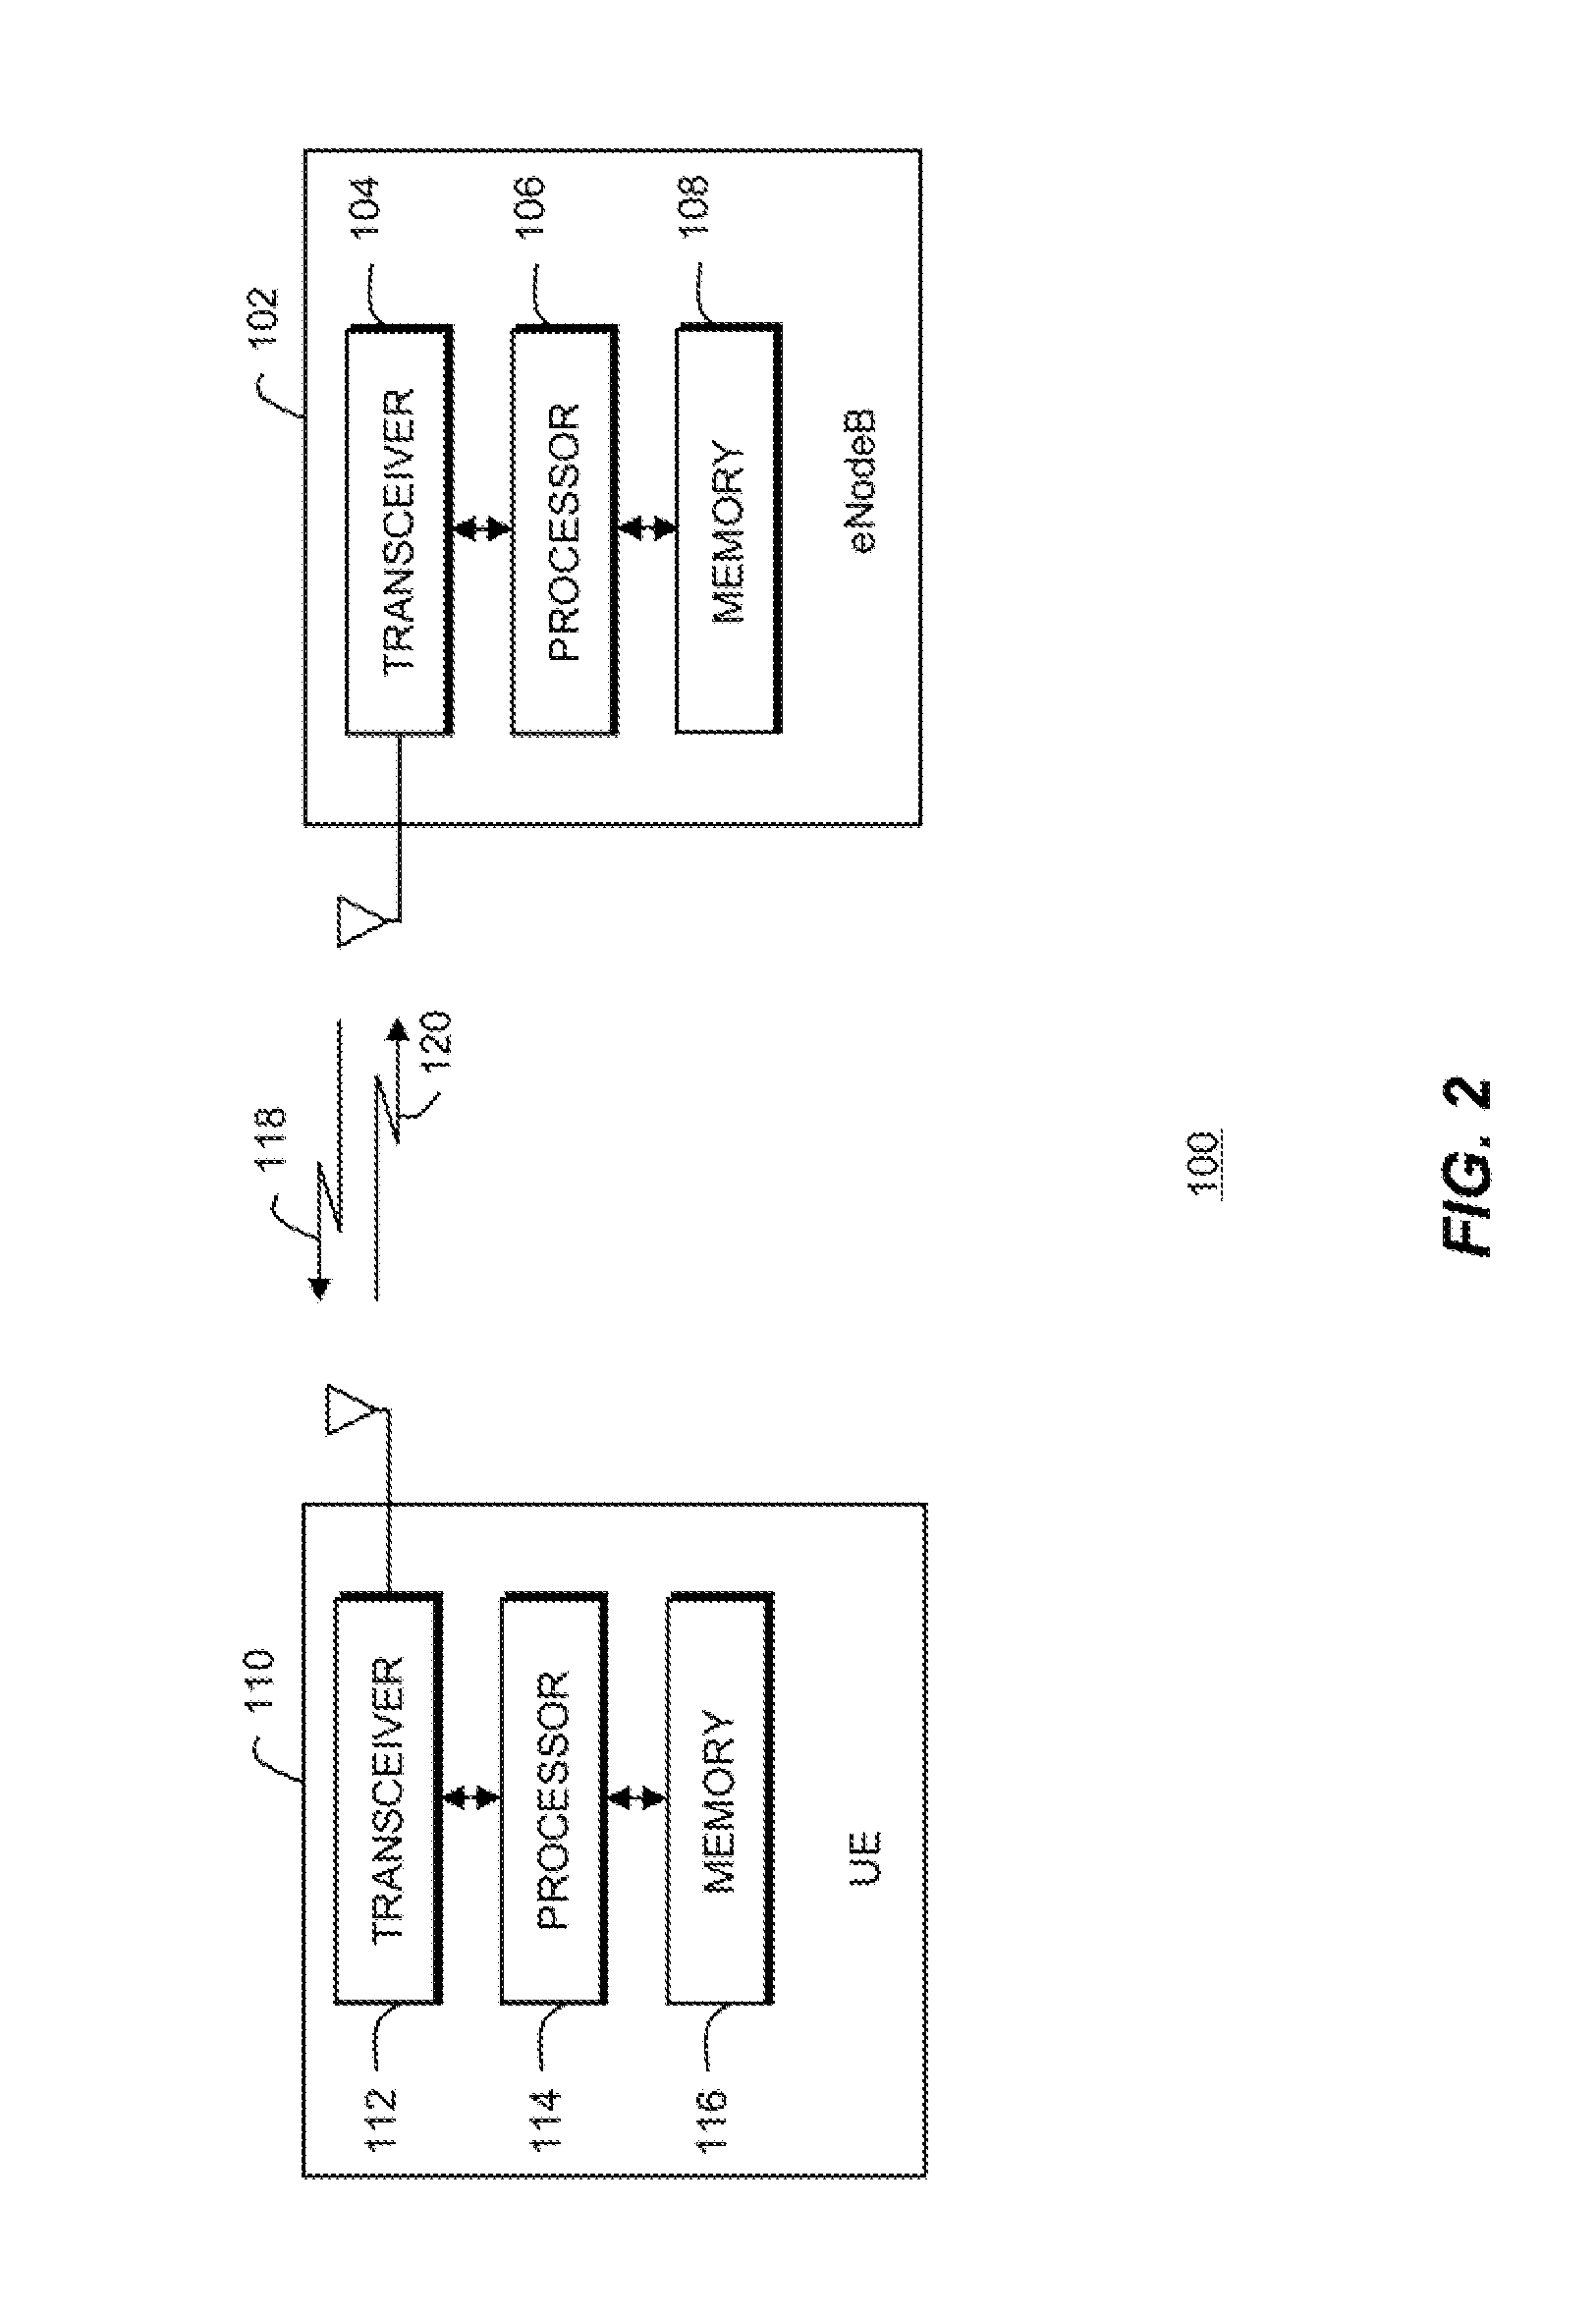 Uplink power control for channel aggregation in a communication network